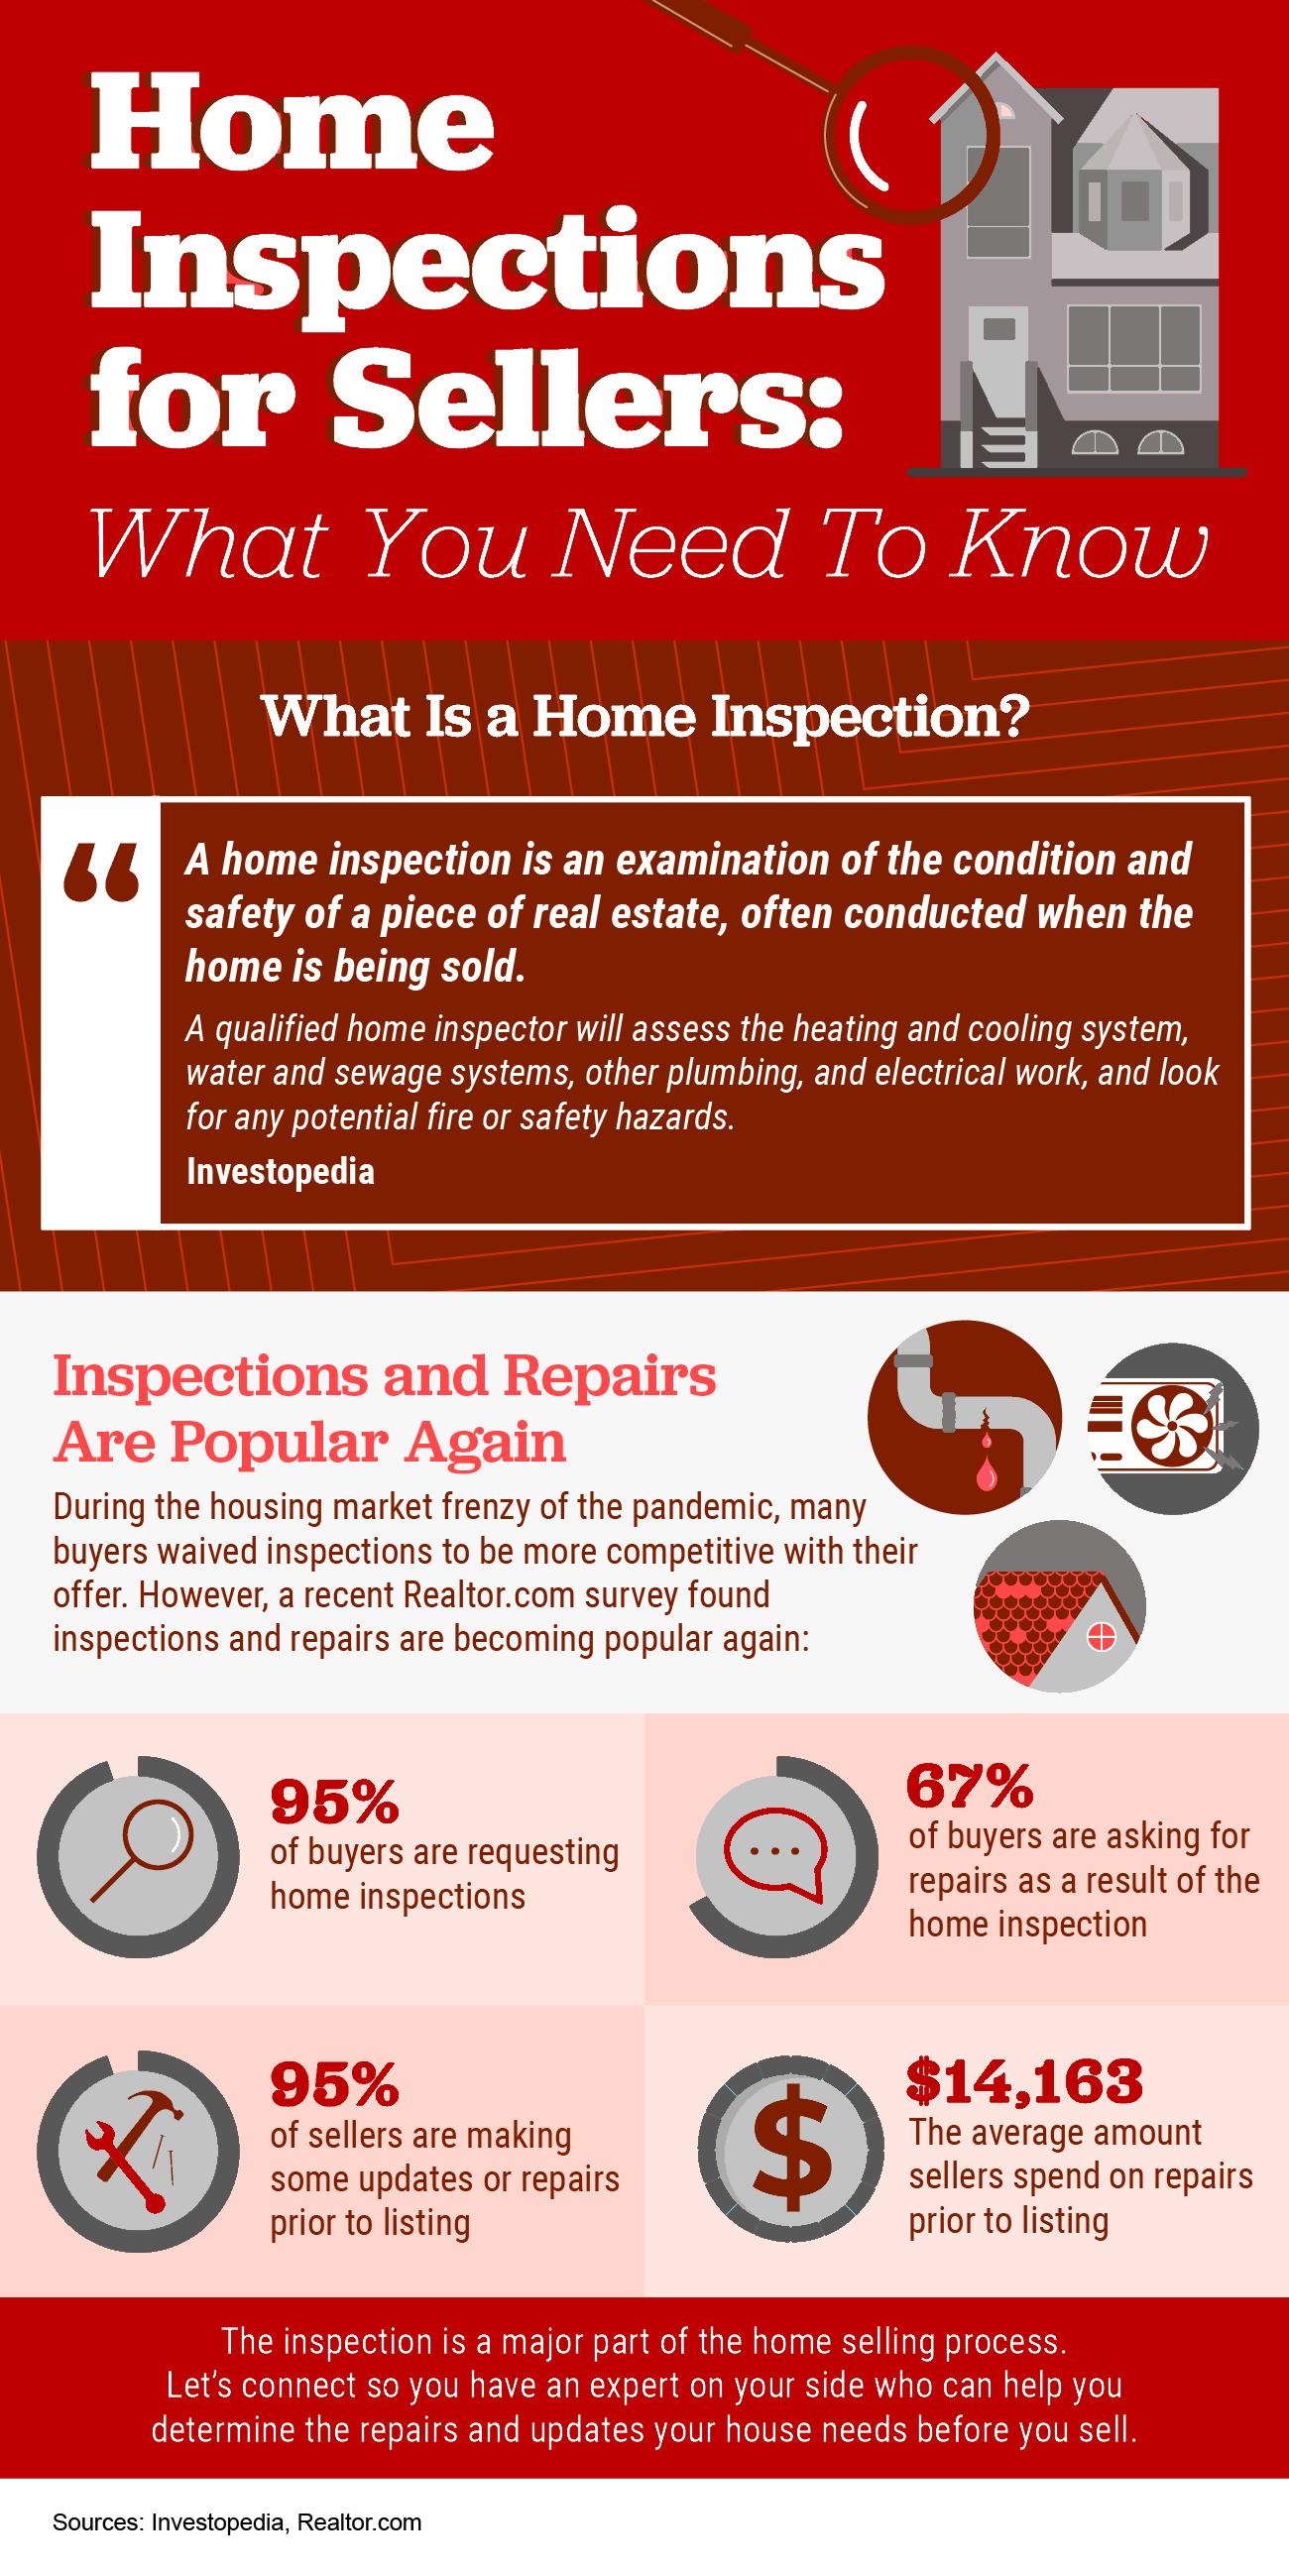 Buyers Home Inspections